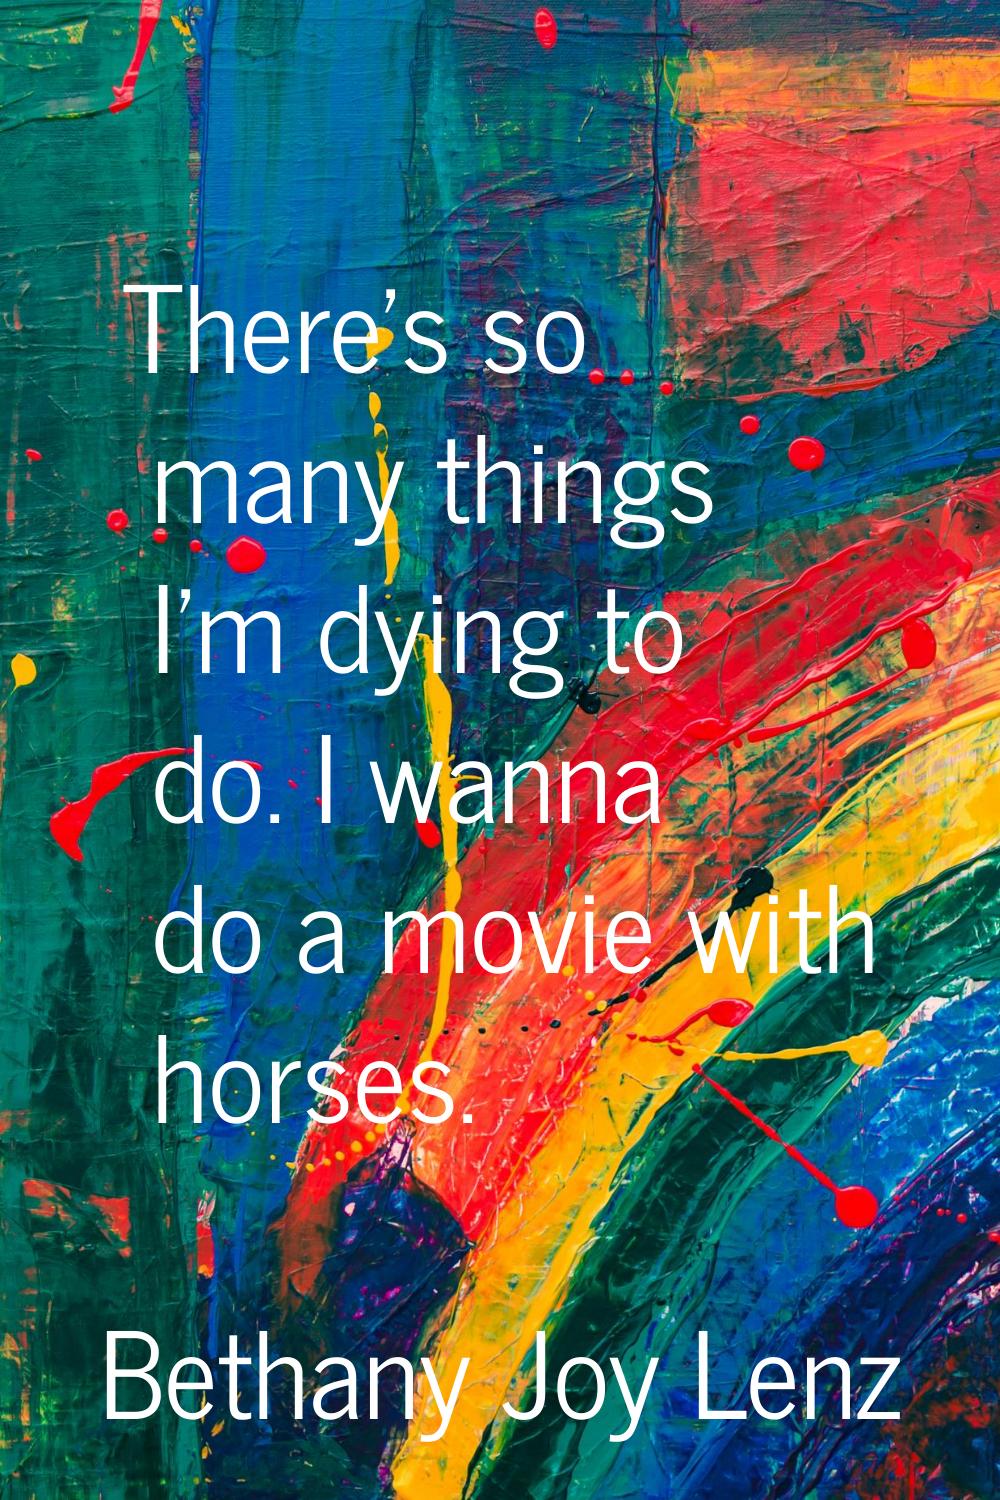 There's so many things I'm dying to do. I wanna do a movie with horses.